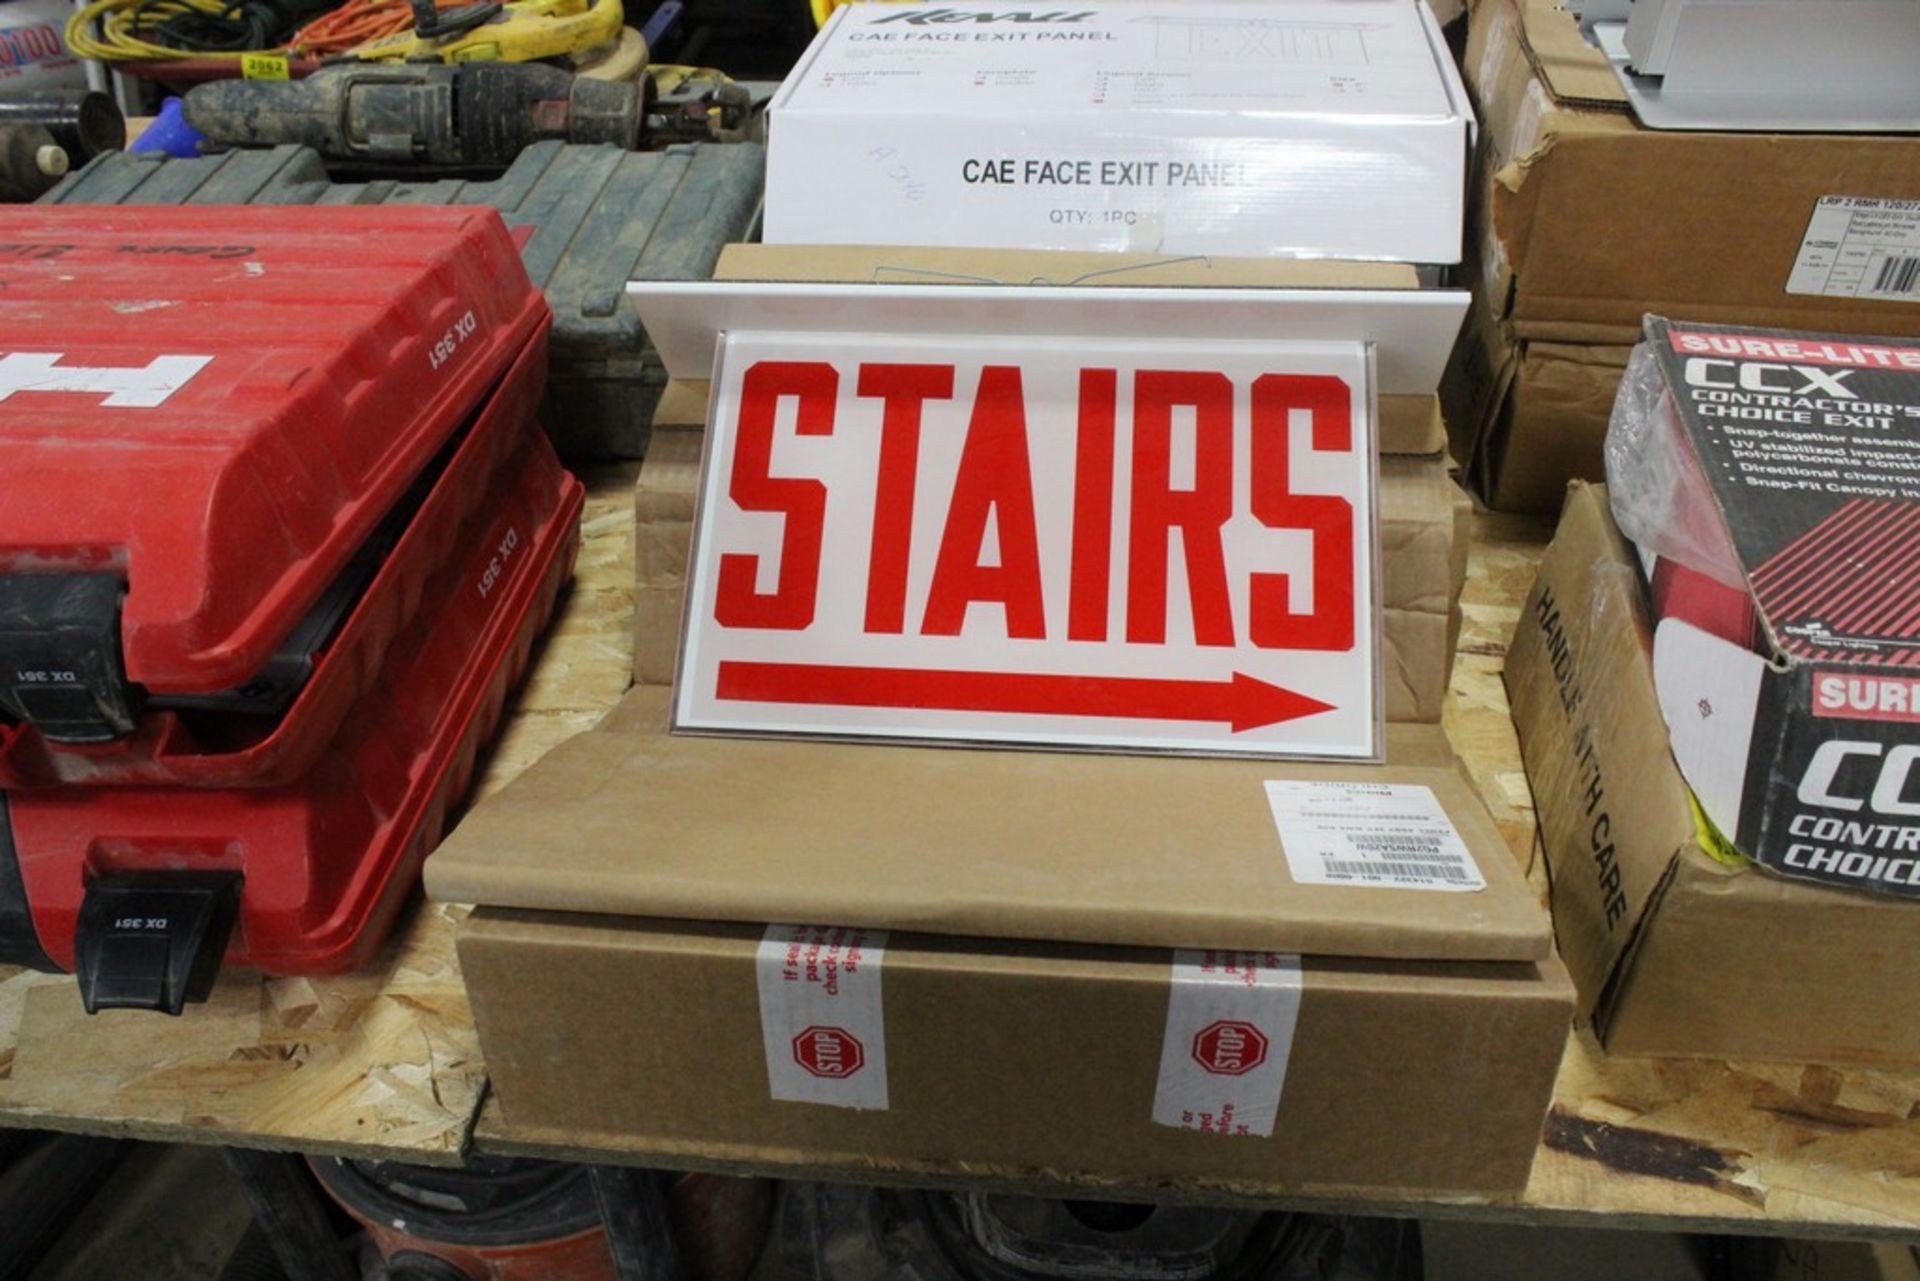 (4) DOUBLE SIDED "STAIRS" SIGNS